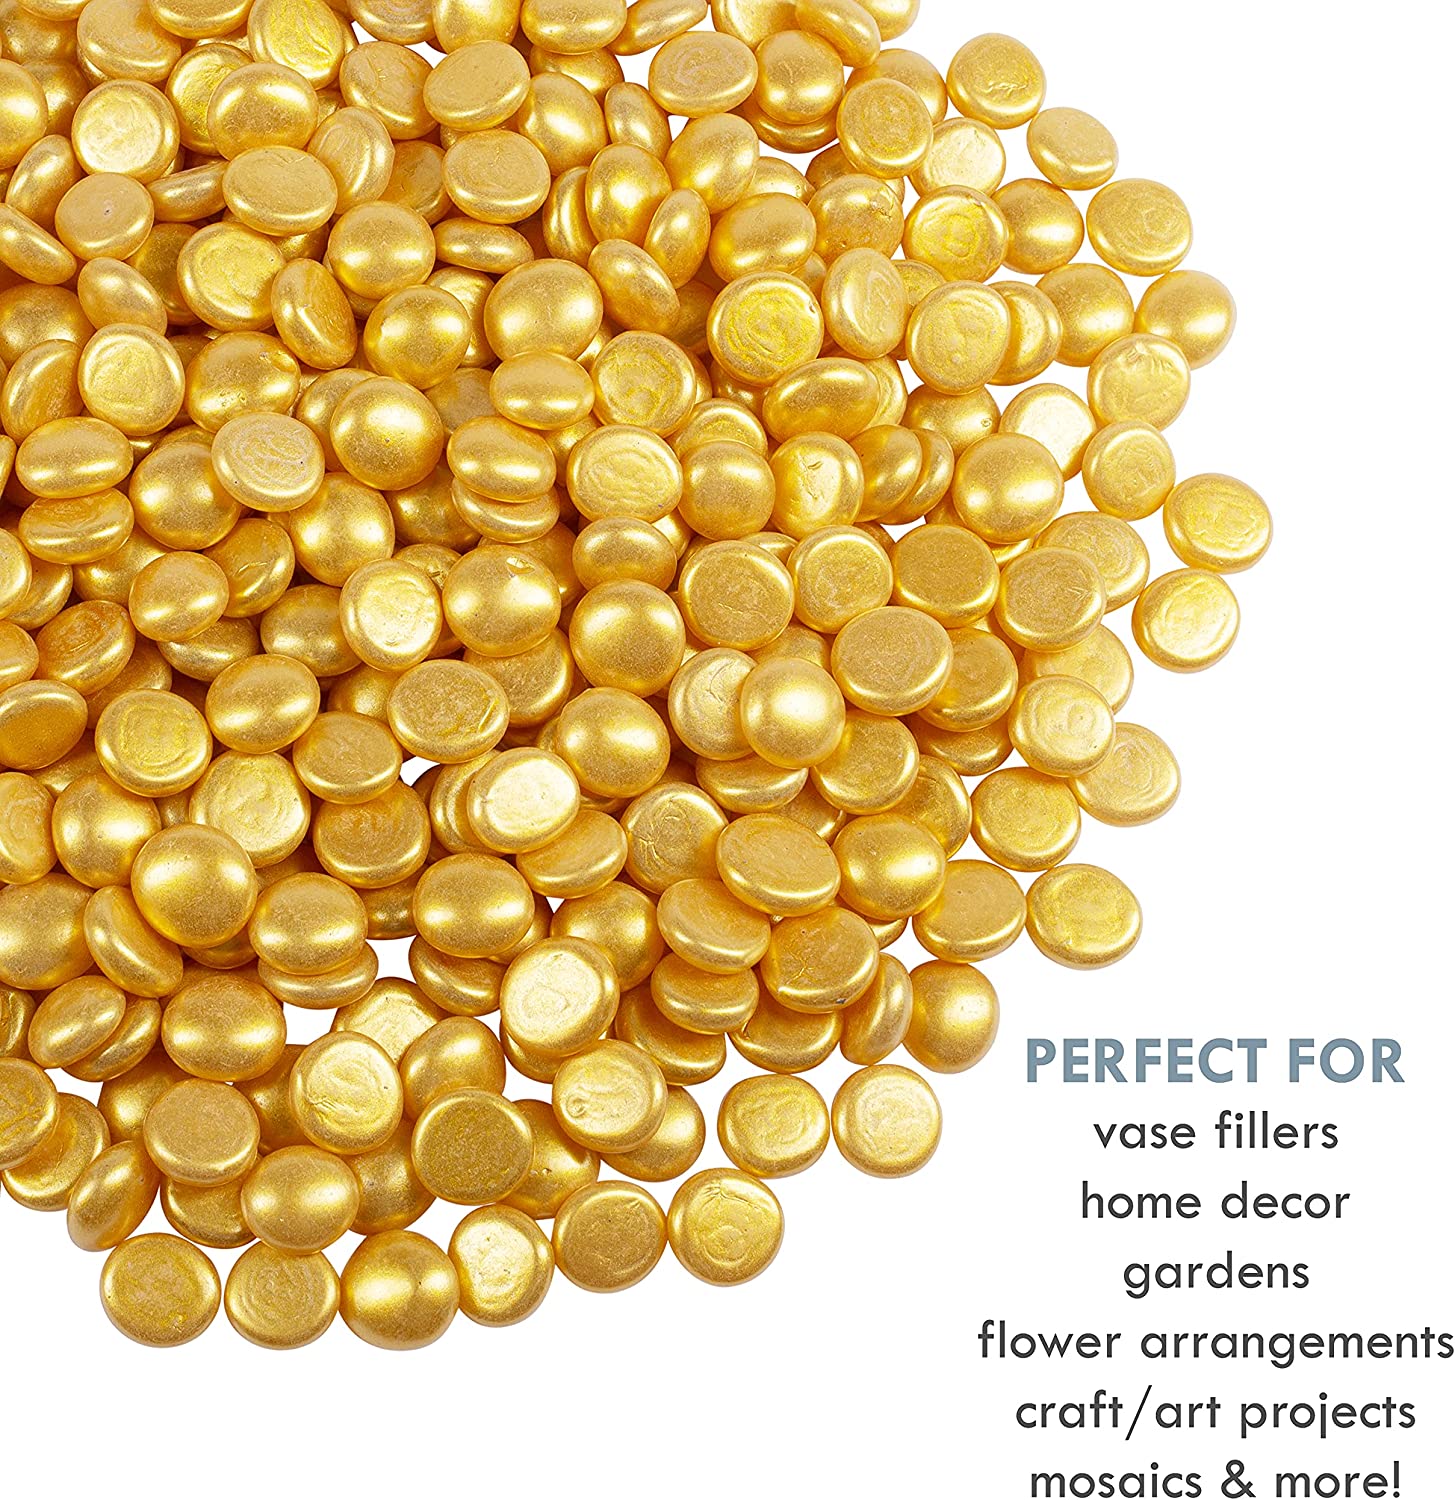 Galashield Gold Flat Glass Marbles for Vases Glass Gems Beads Pebbles Vase Filler 5 LBS, Approx. 450 PCS - image 4 of 7